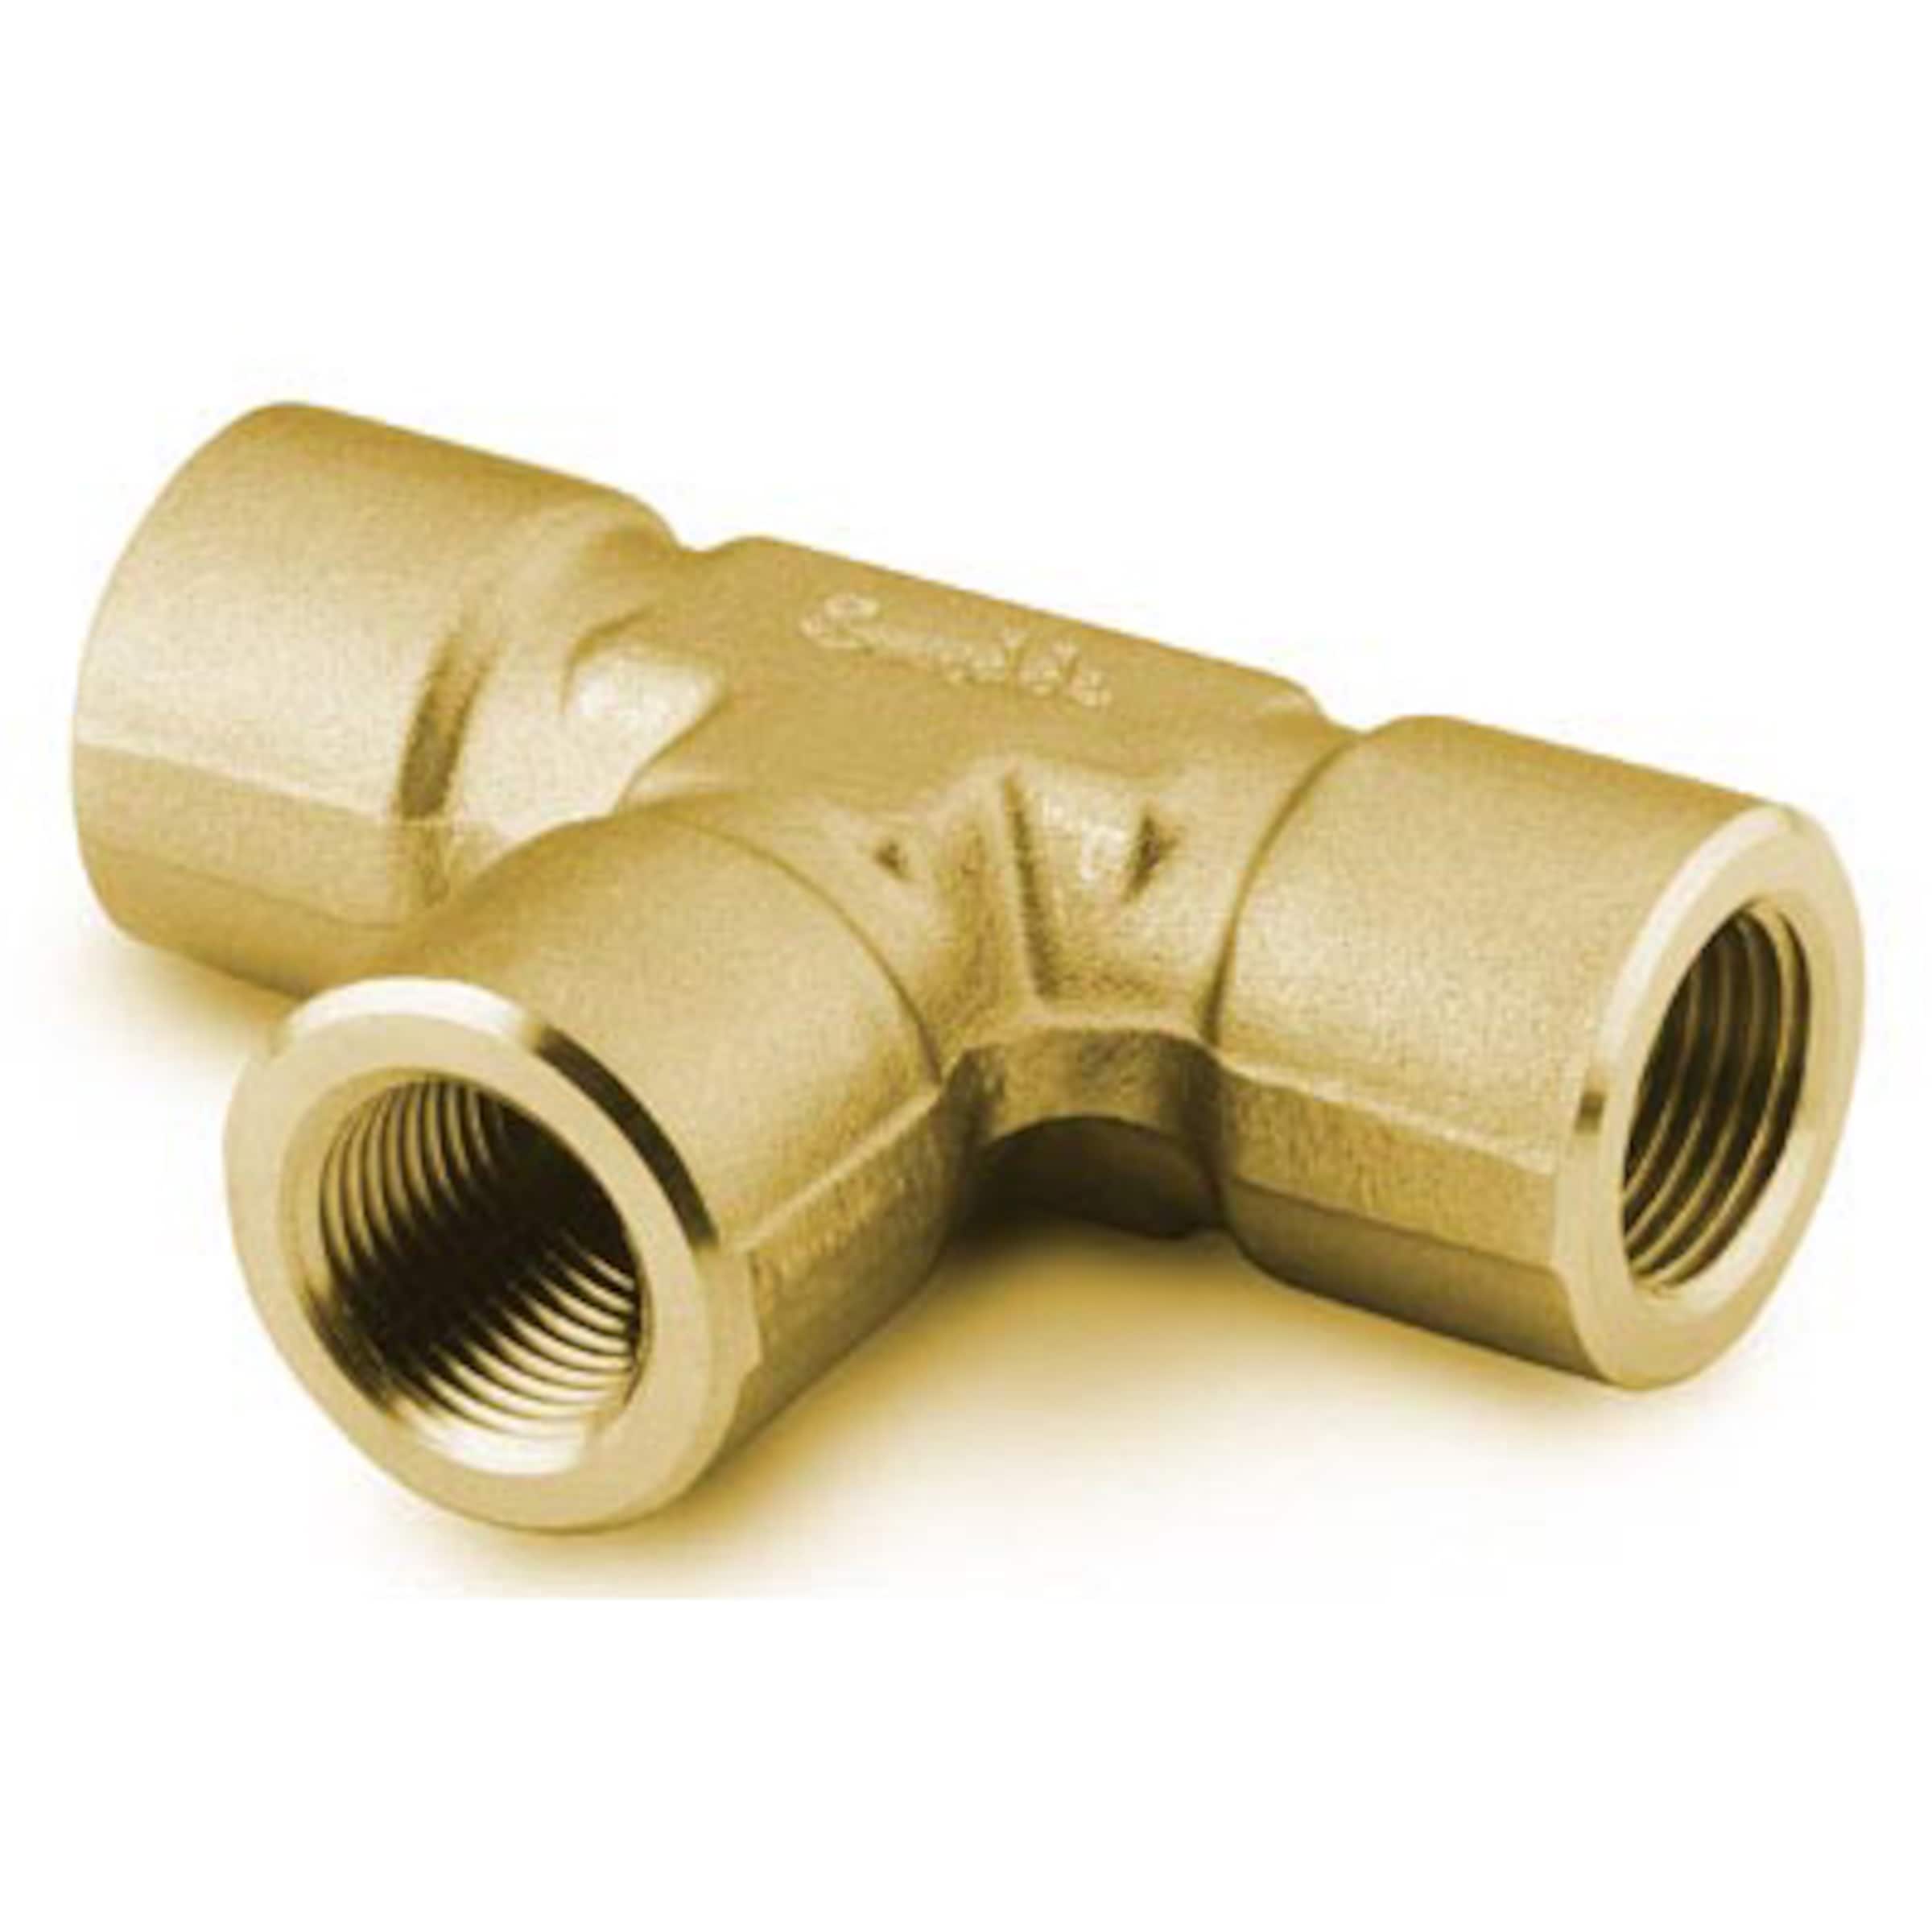 Brass Nozzle, 1/2 Inch (Inside Thread), ISI Approved